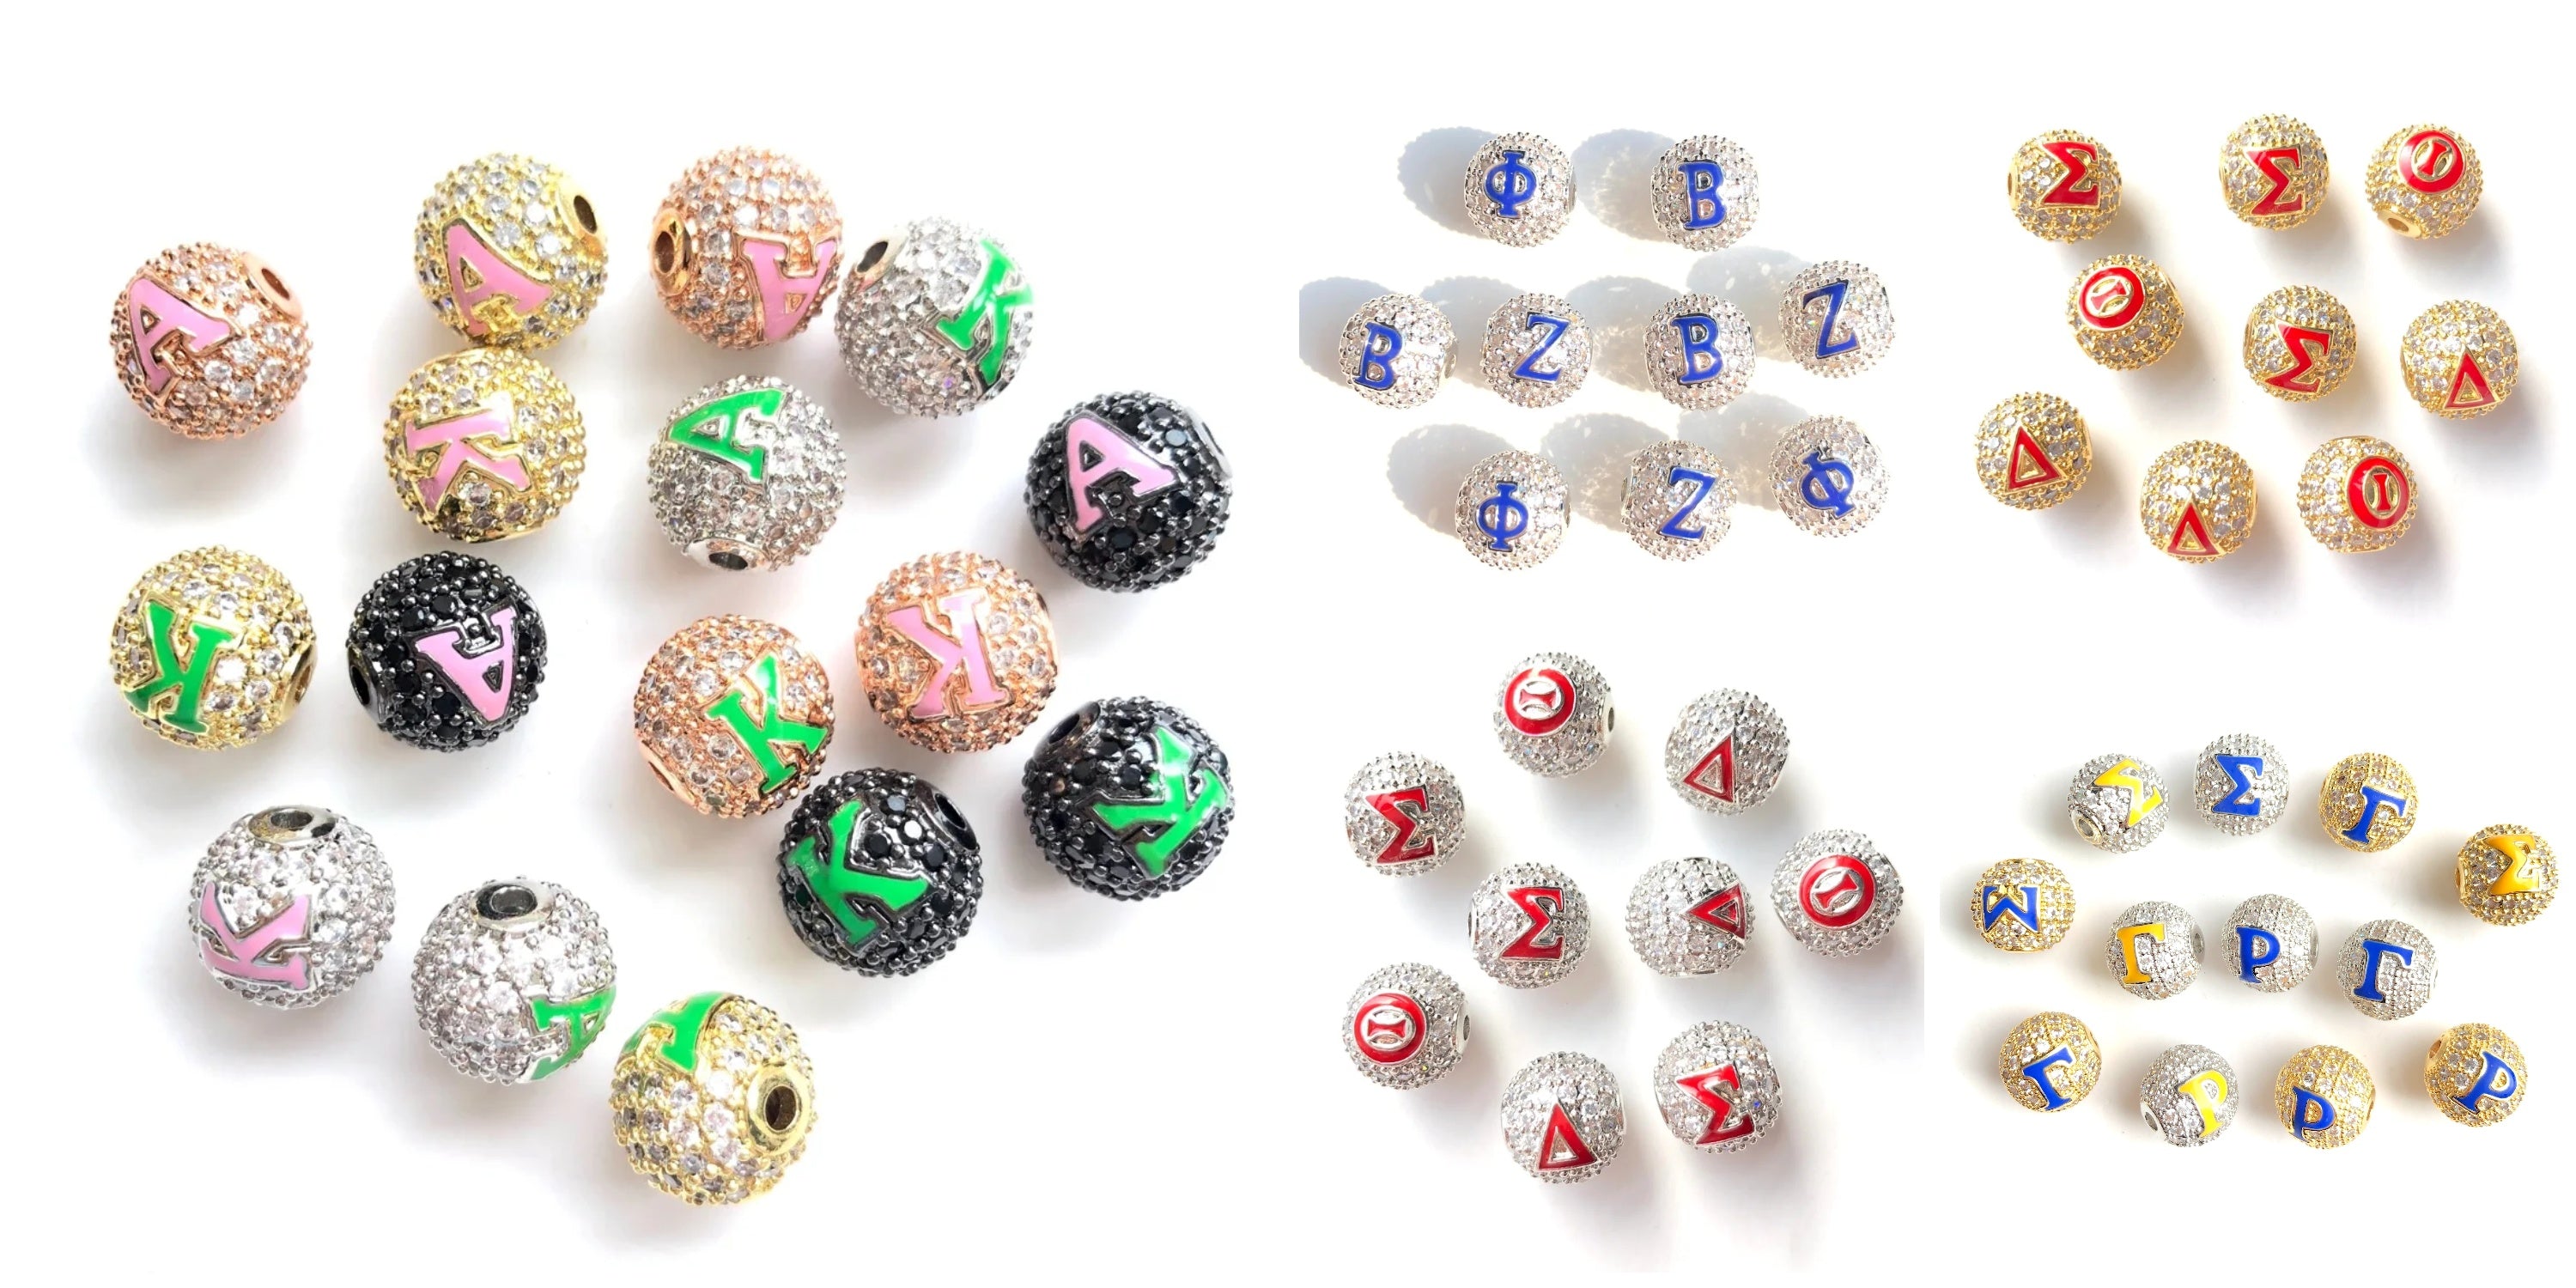 10 Small Glass Beads eye 6 Mm Different Colors 